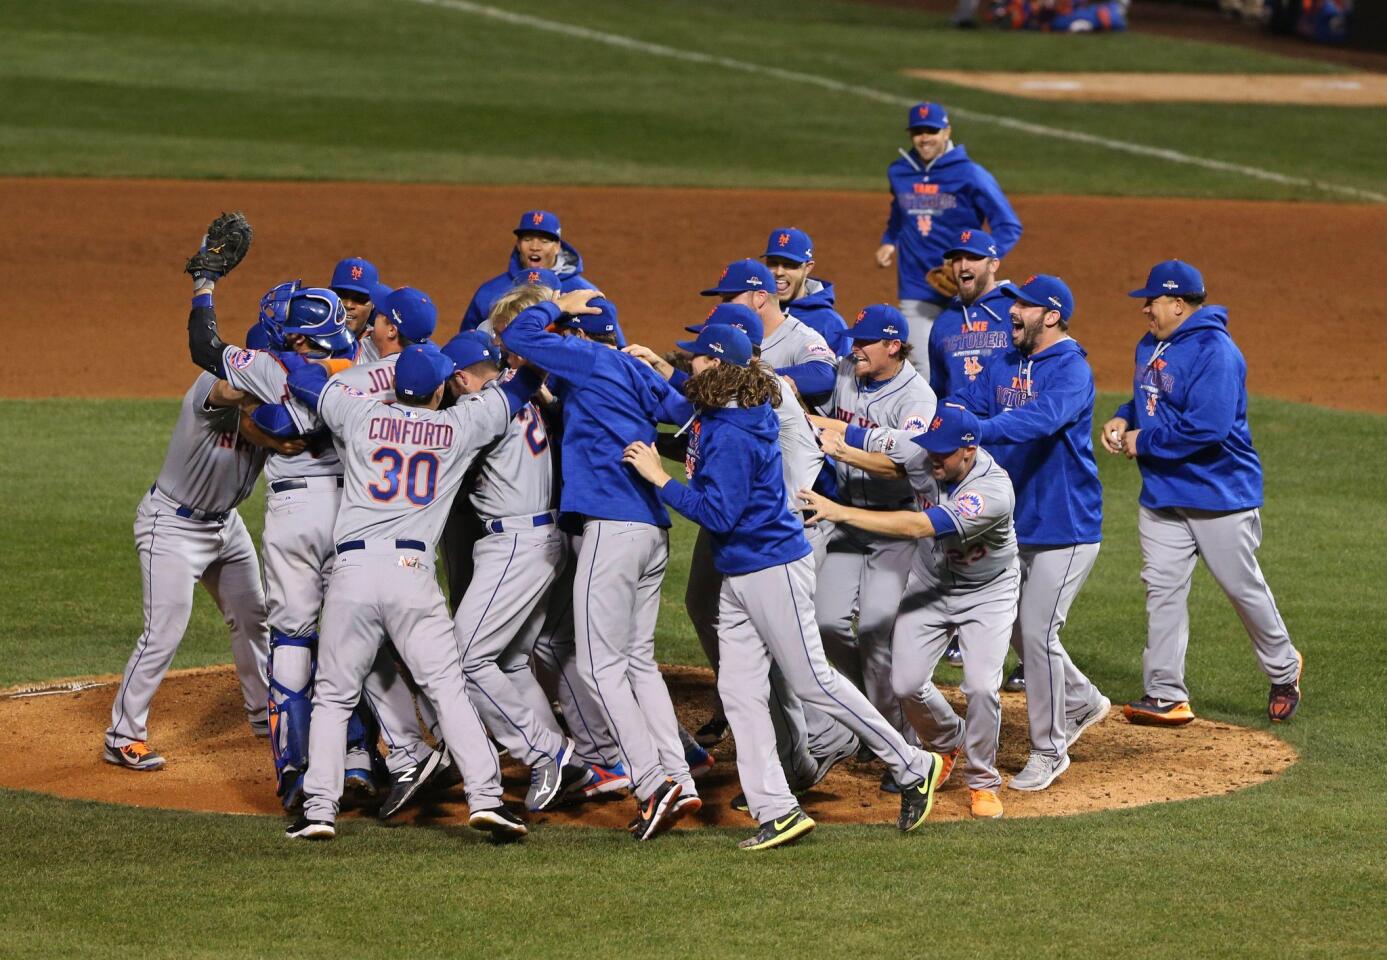 Oct 21, 2015; Chicago, IL, USA; New York Mets players celebrate on the field after defeating the Chicago Cubs in game four of the NLCS at Wrigley Field. Mandatory Credit: Aaron Doster-USA TODAY Sports ** Usable by SD ONLY **